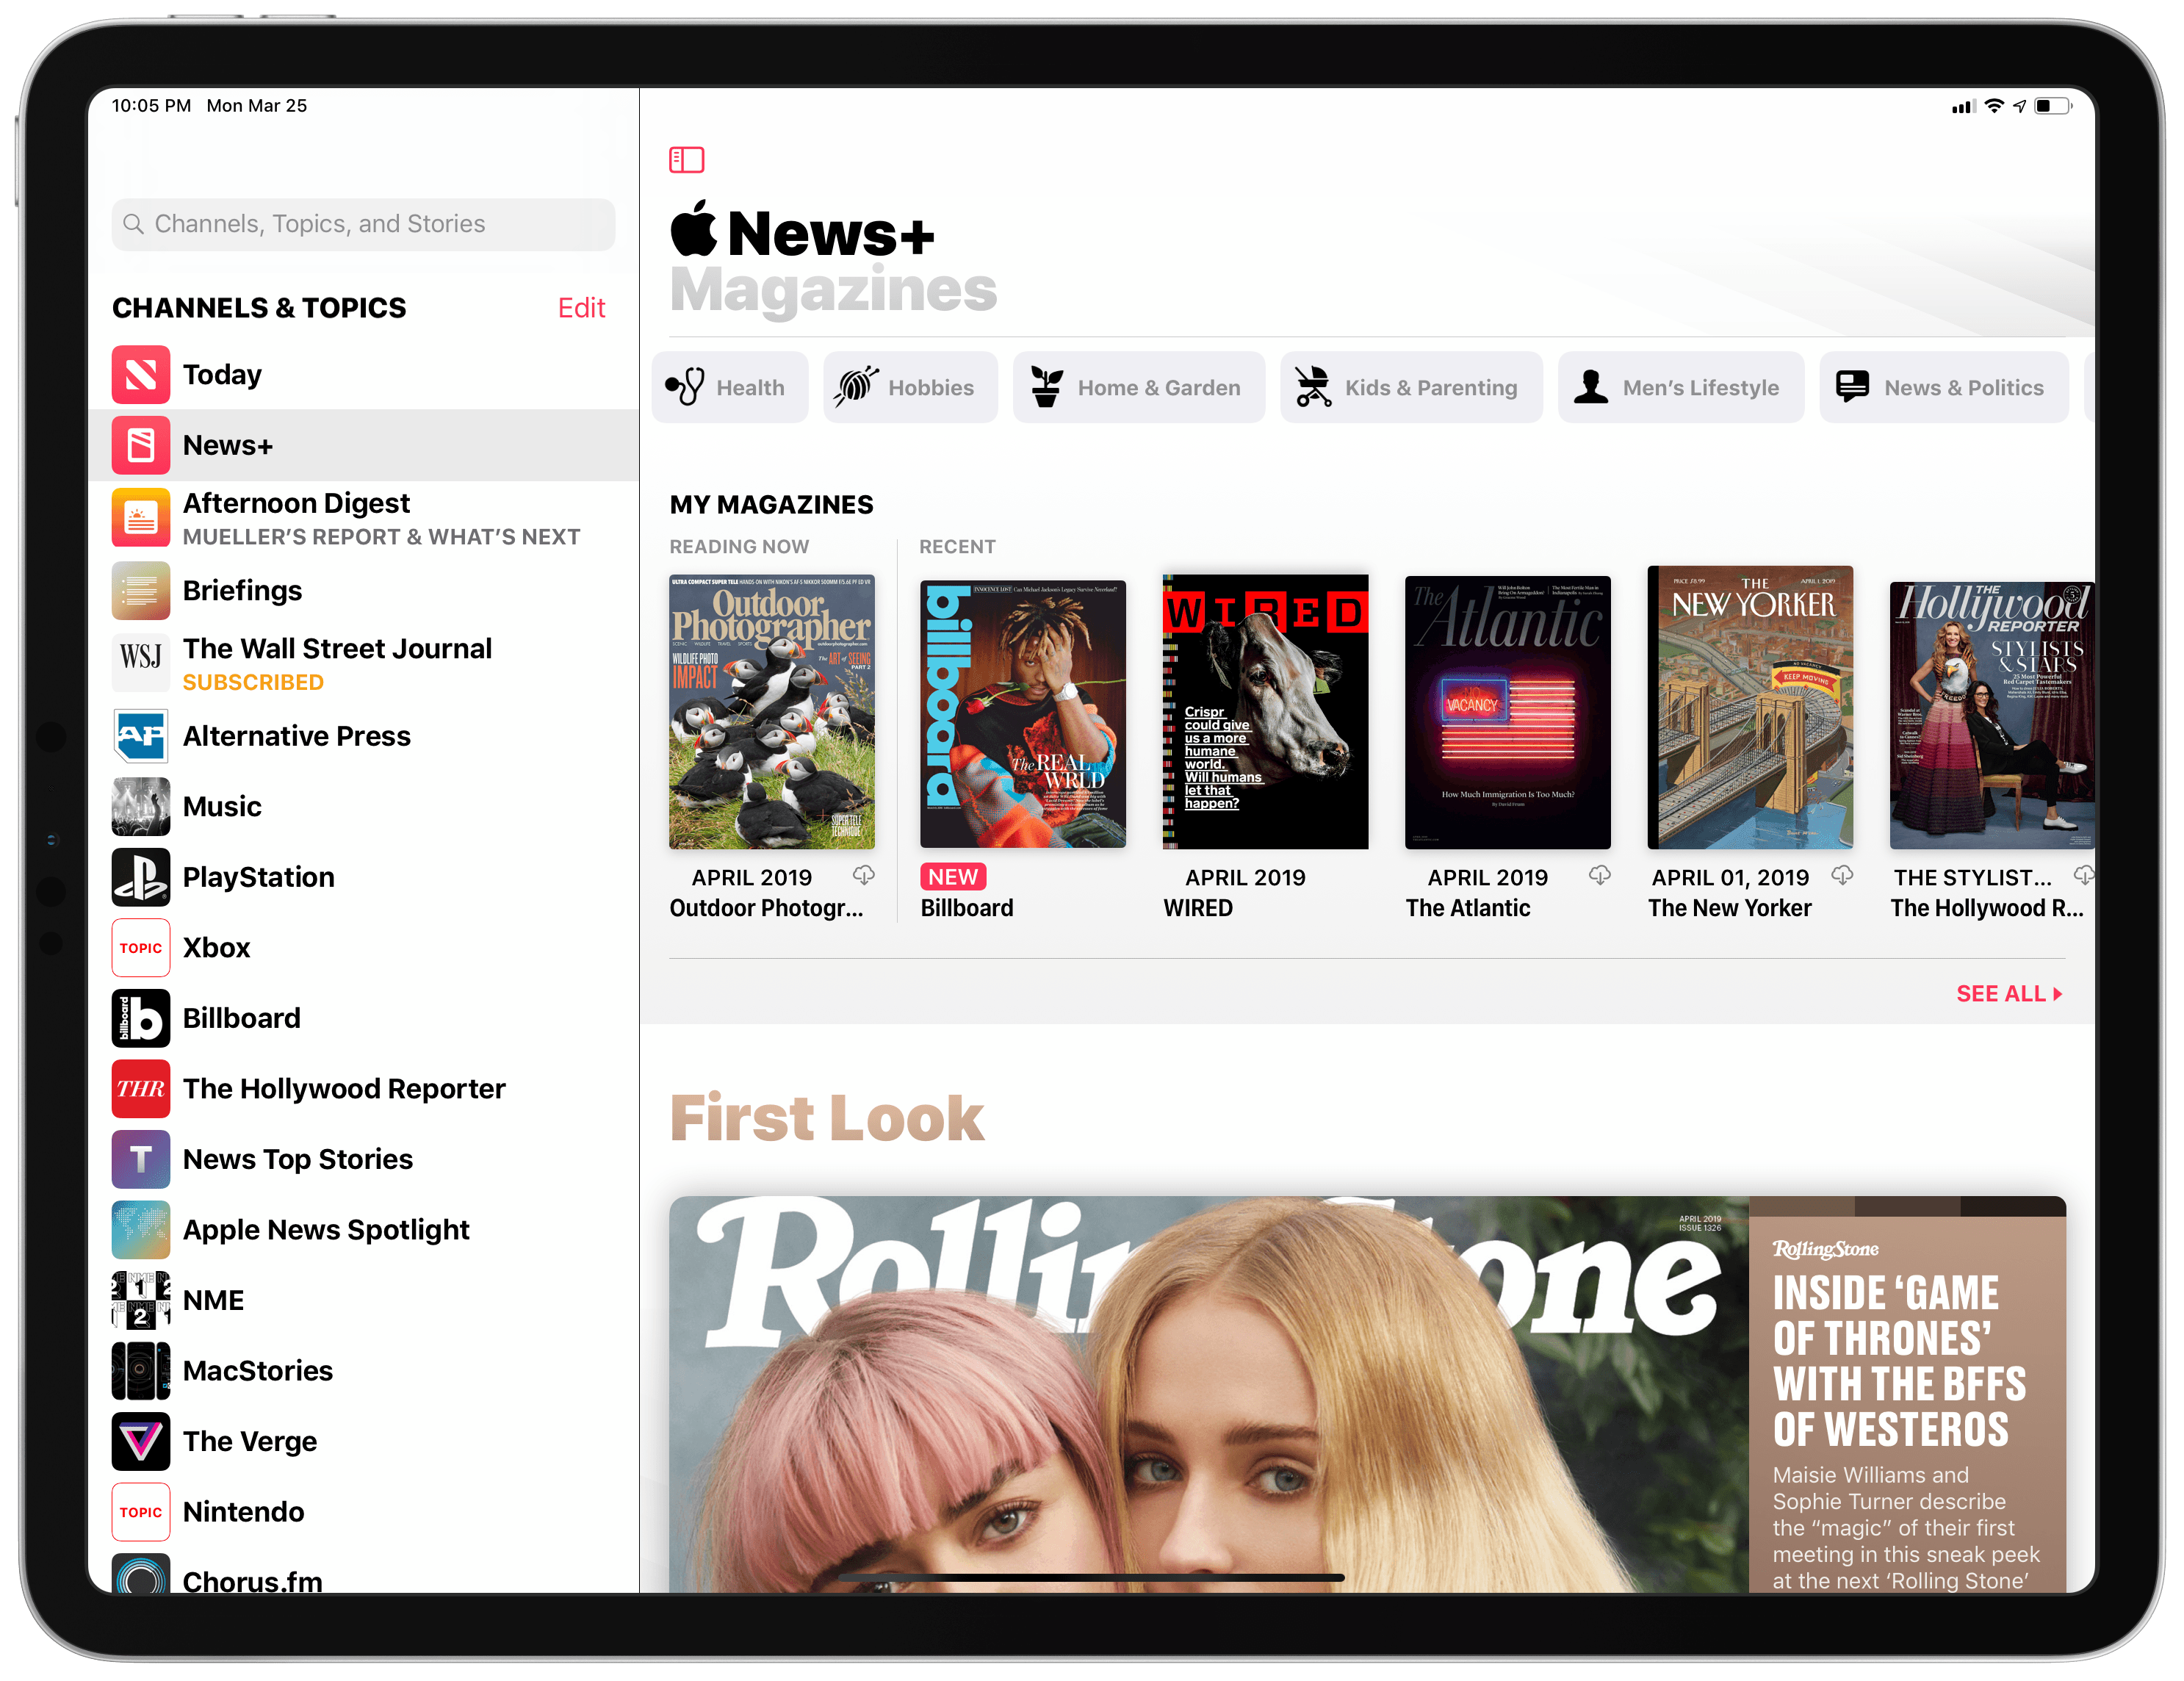 The main page of Apple News+.